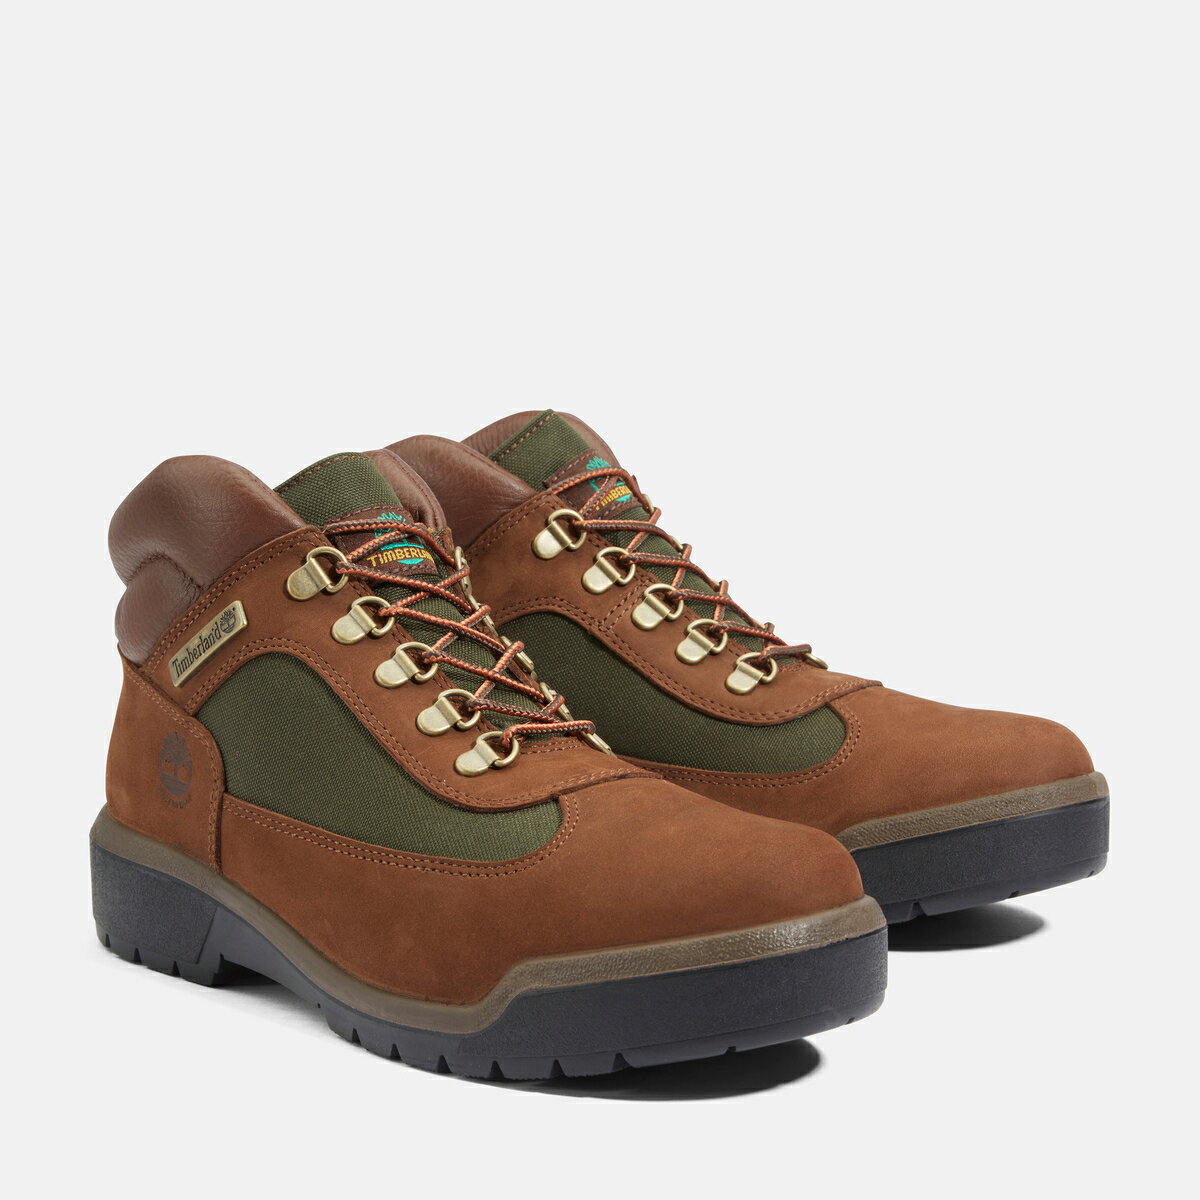 SHOES FAIR 10%OFF TIMBERLAND FIELD BOOT F/L WP BEEF & BROCCOLI ...